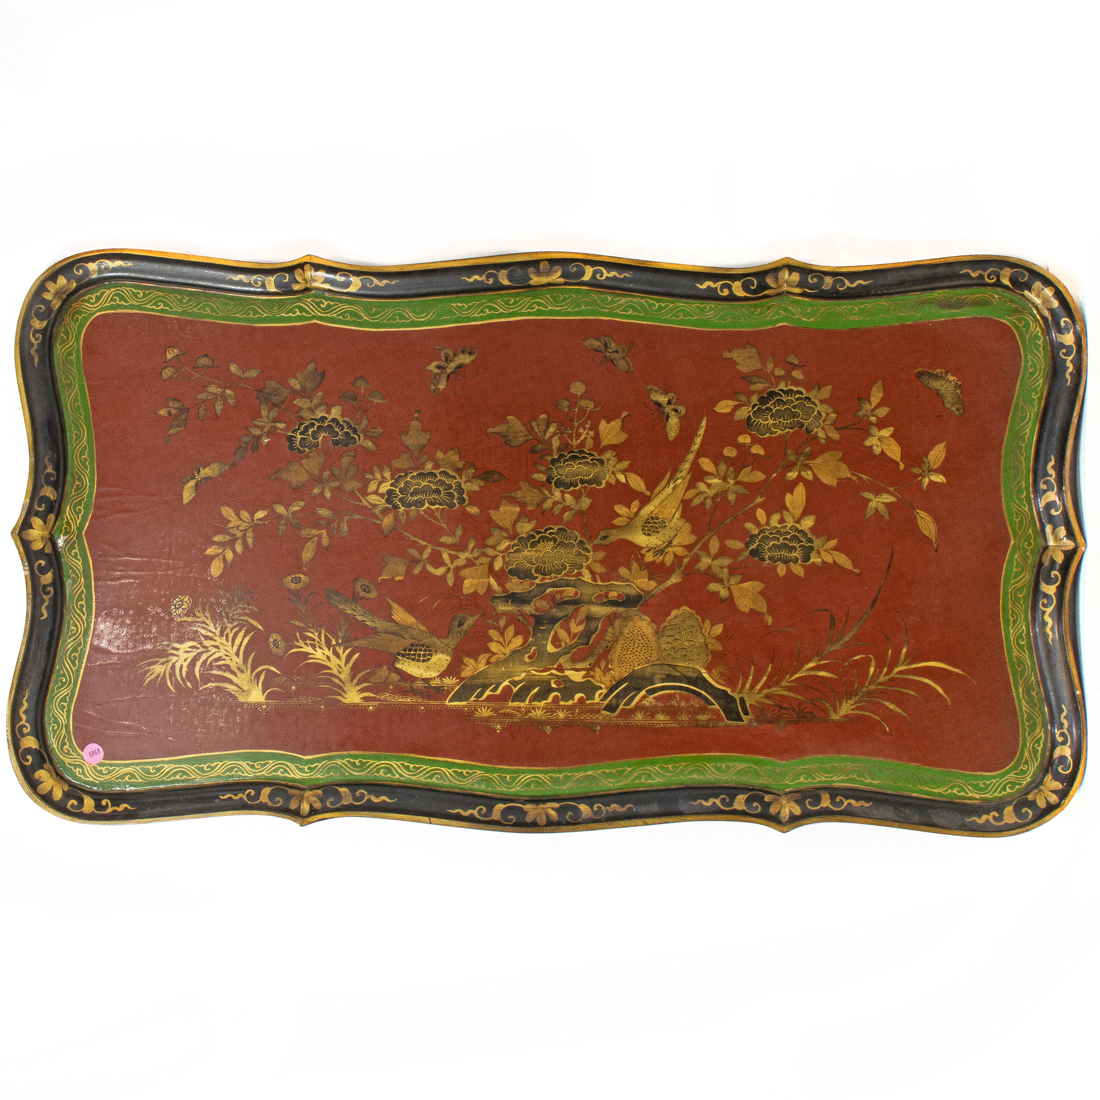 CHINOISERIE STYLE LACQUERED TRAY 3a1acf